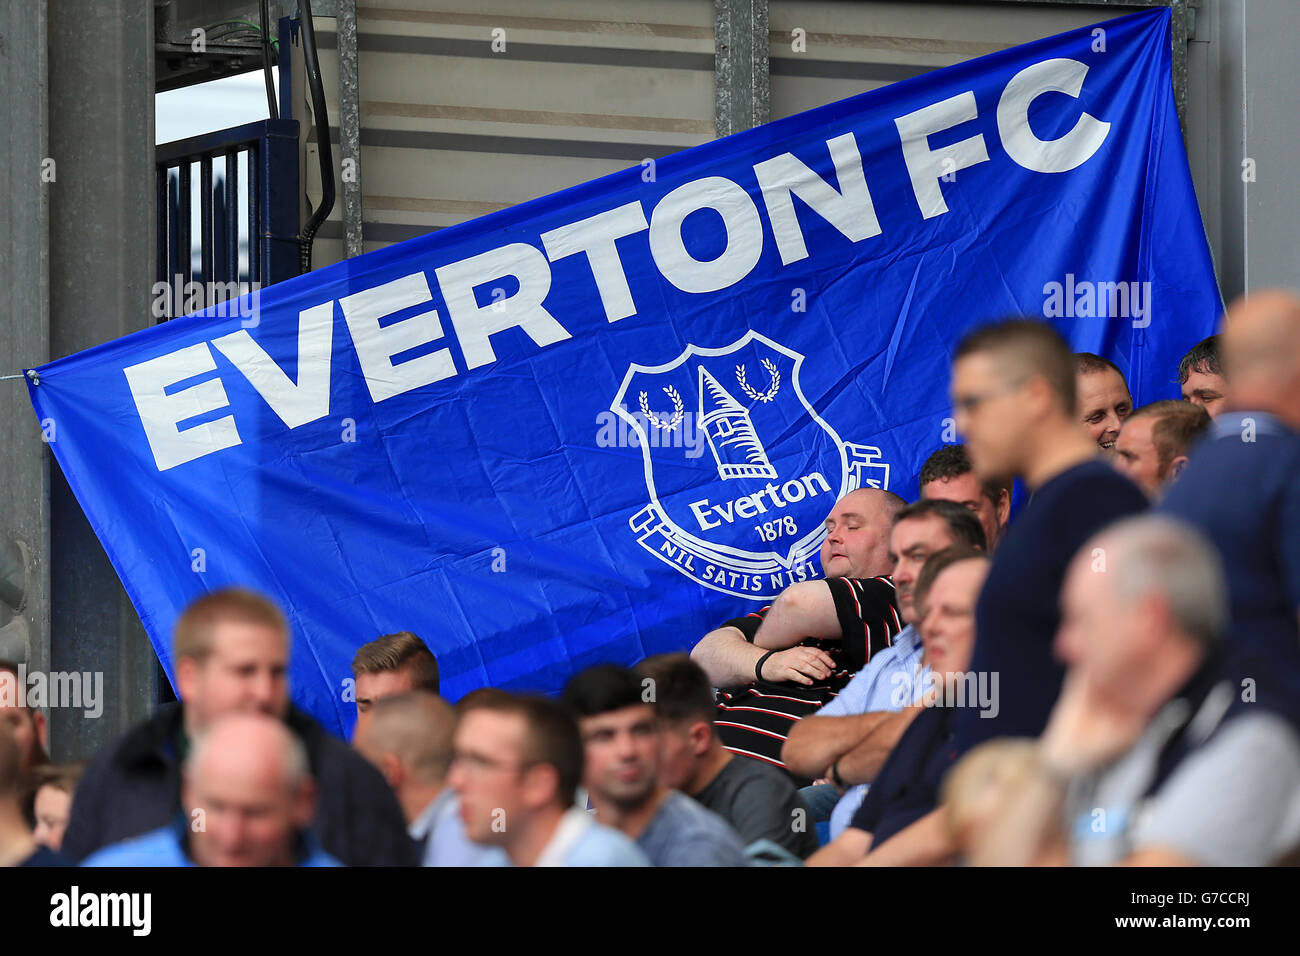 Soccer - Barclays Premier League - West Bromwich Albion v Everton - The Hawthorns. An Everton FC banner in the stands. Stock Photo